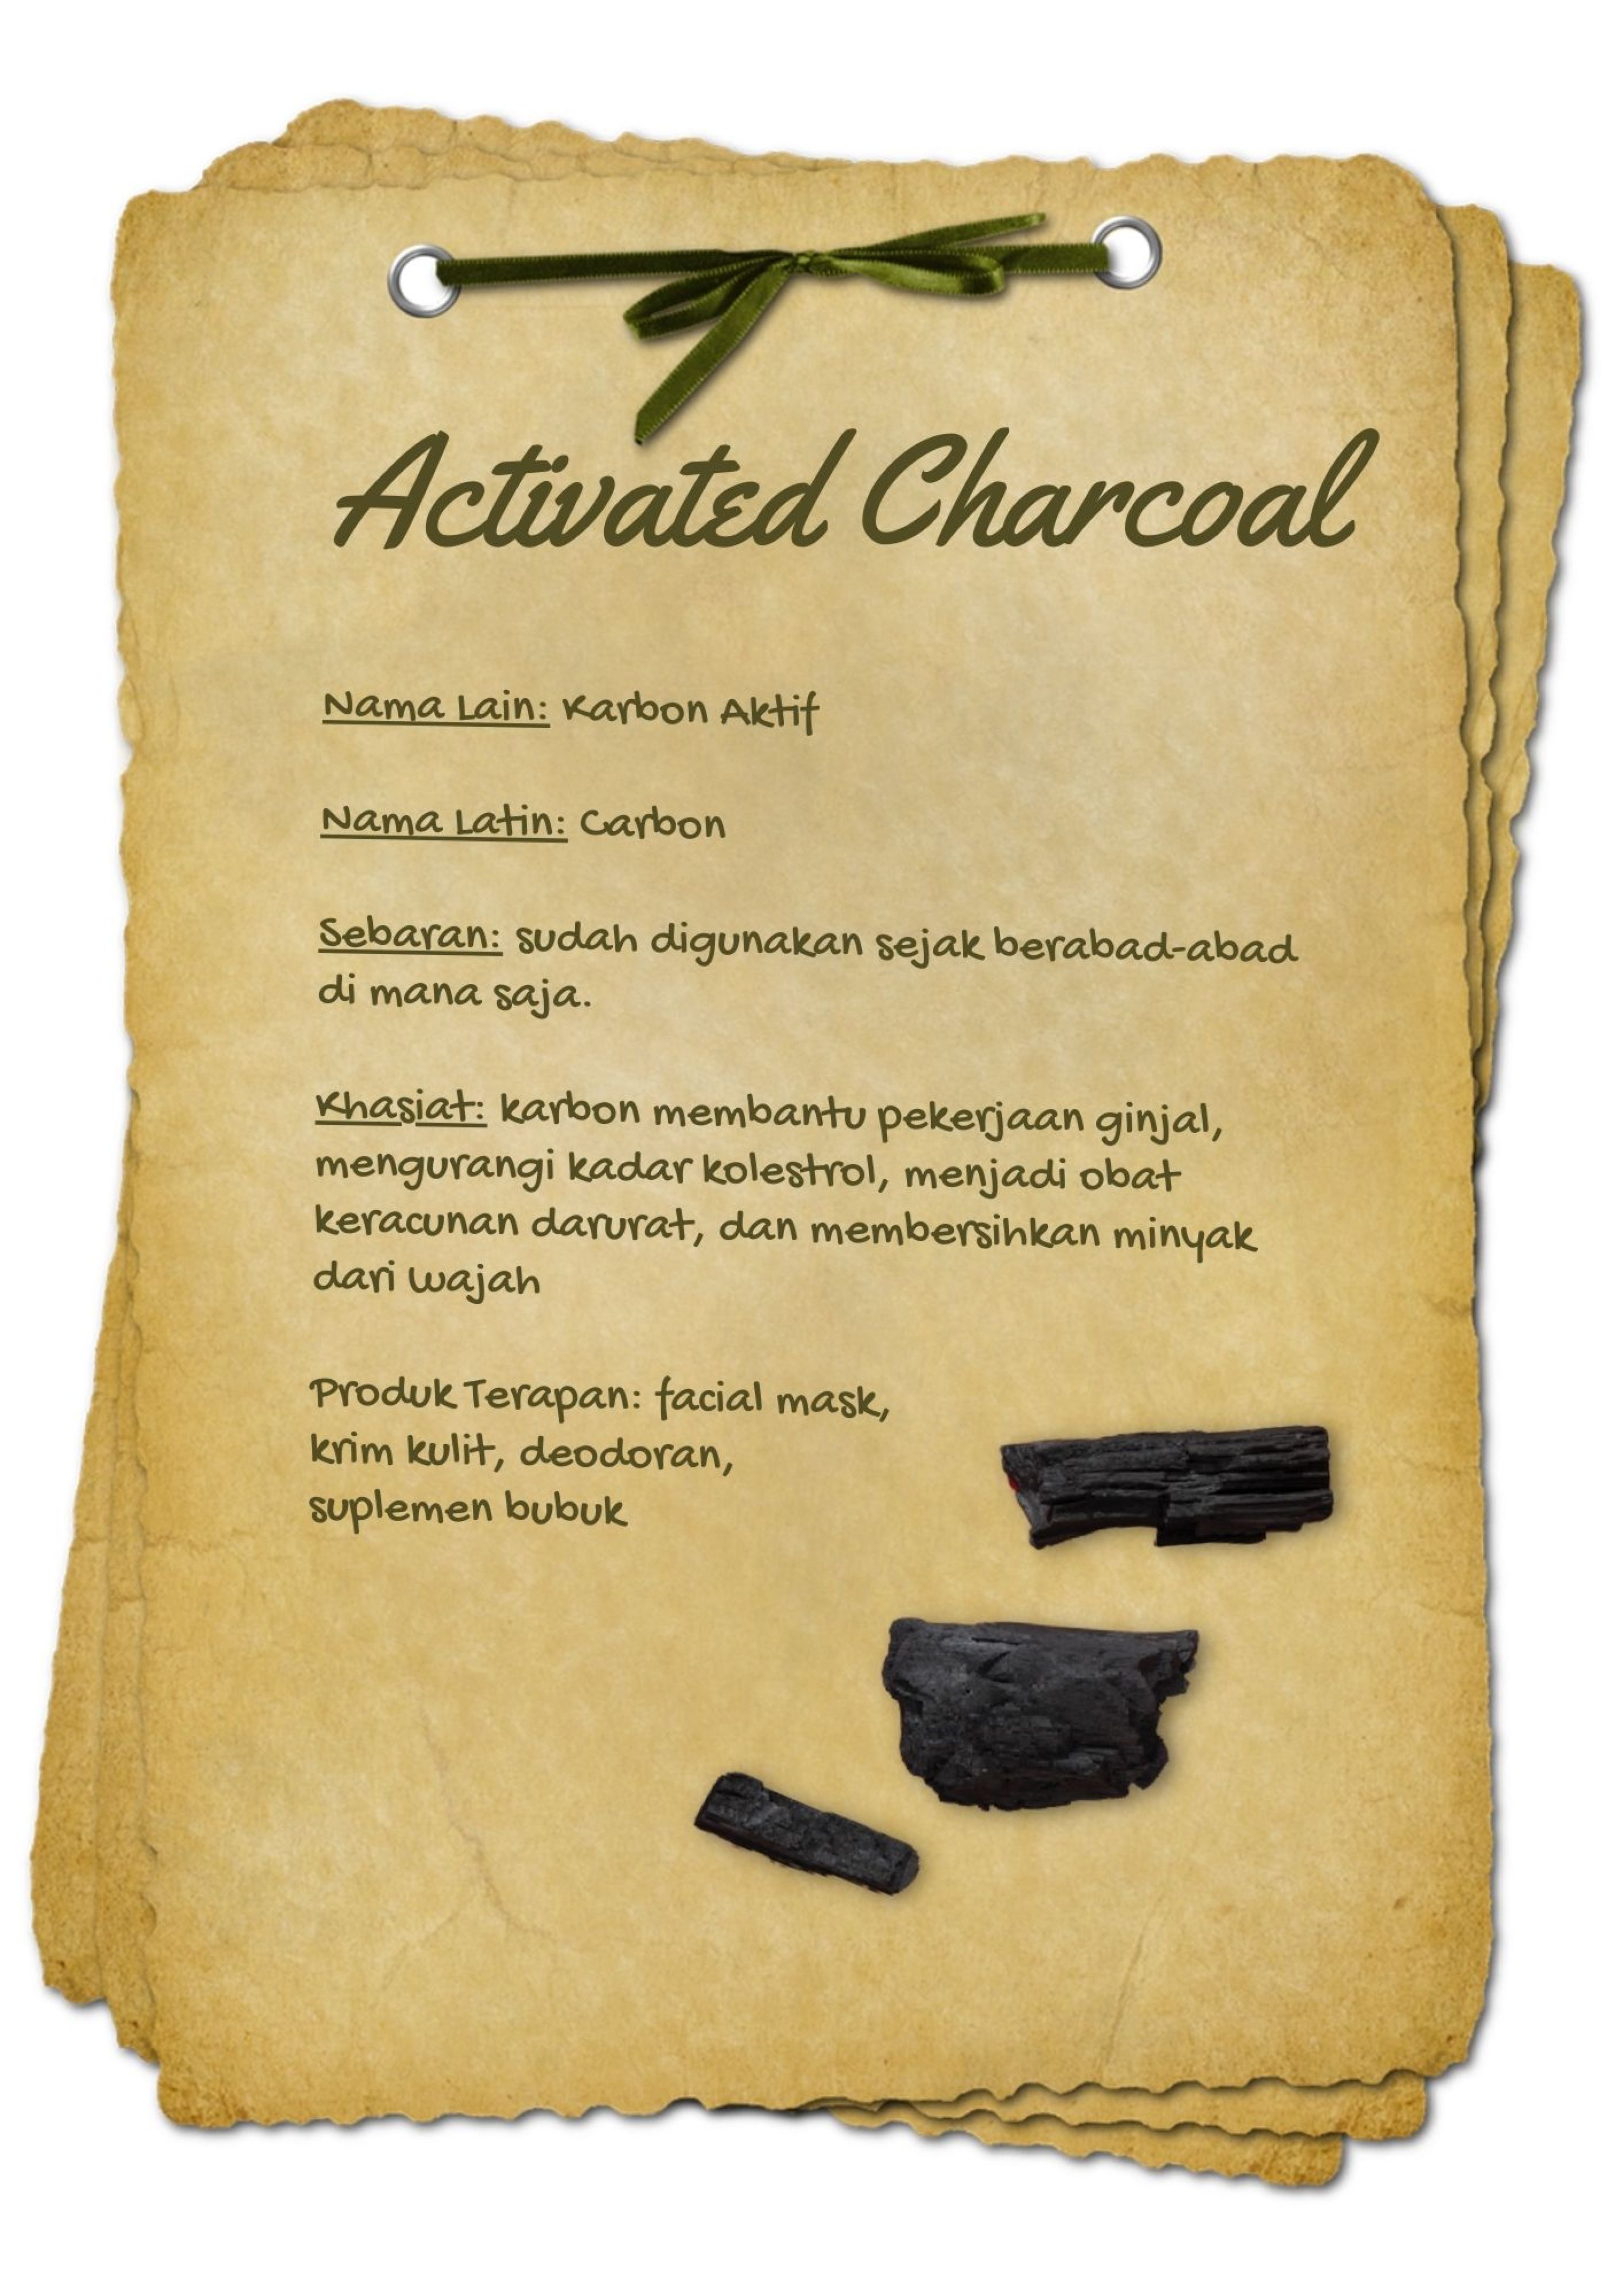 ACTIVATED CHARCOAL.jpg